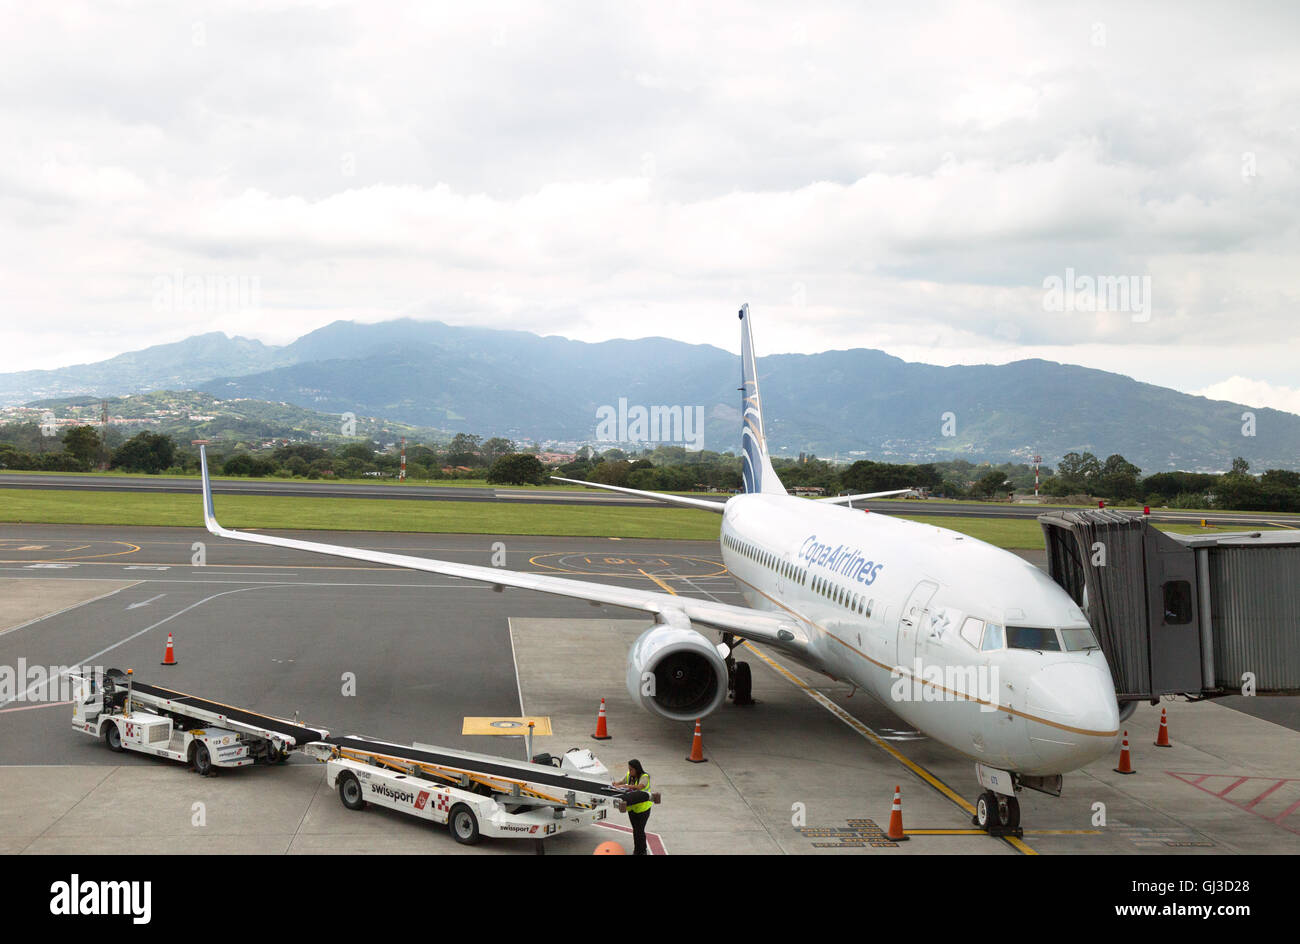 A Copa Airlines plane, national airline of Panama, on the ground, Juan Santamaria airport, San Jose, Costa Rica, Central America Stock Photo